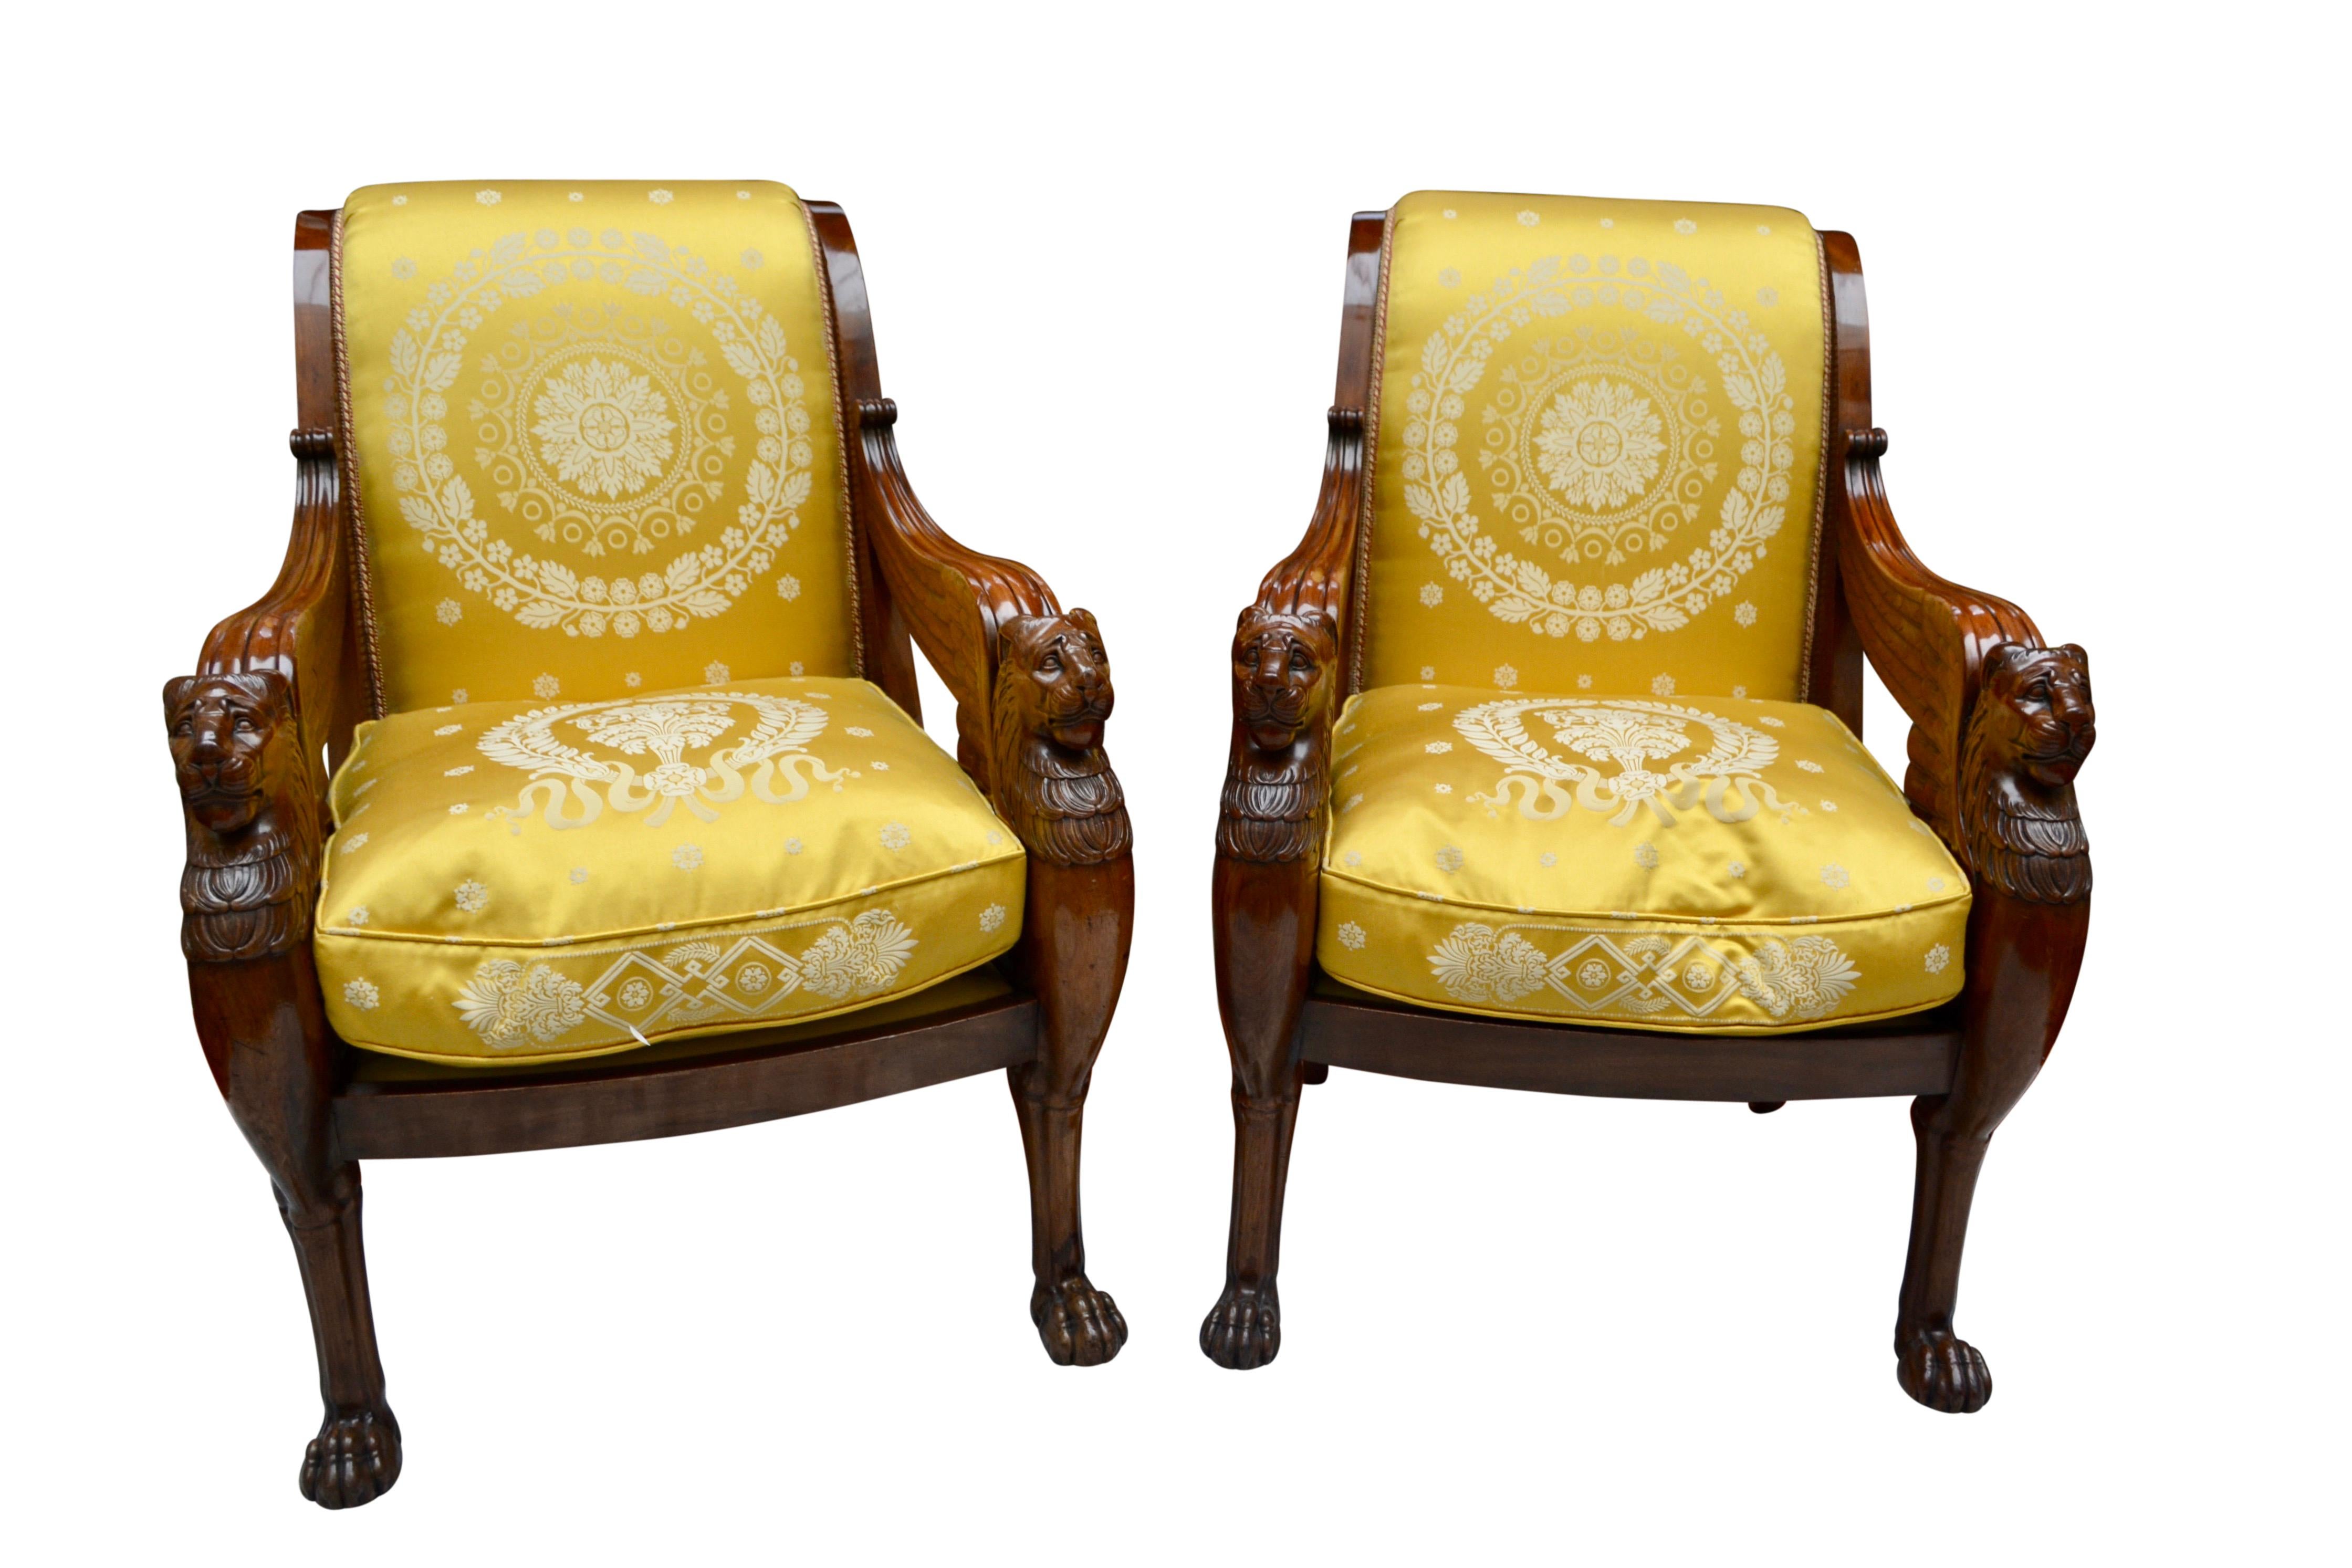 Pair of French Empire Mahogany Armchairs Attributed to Jacob Desmalter 2